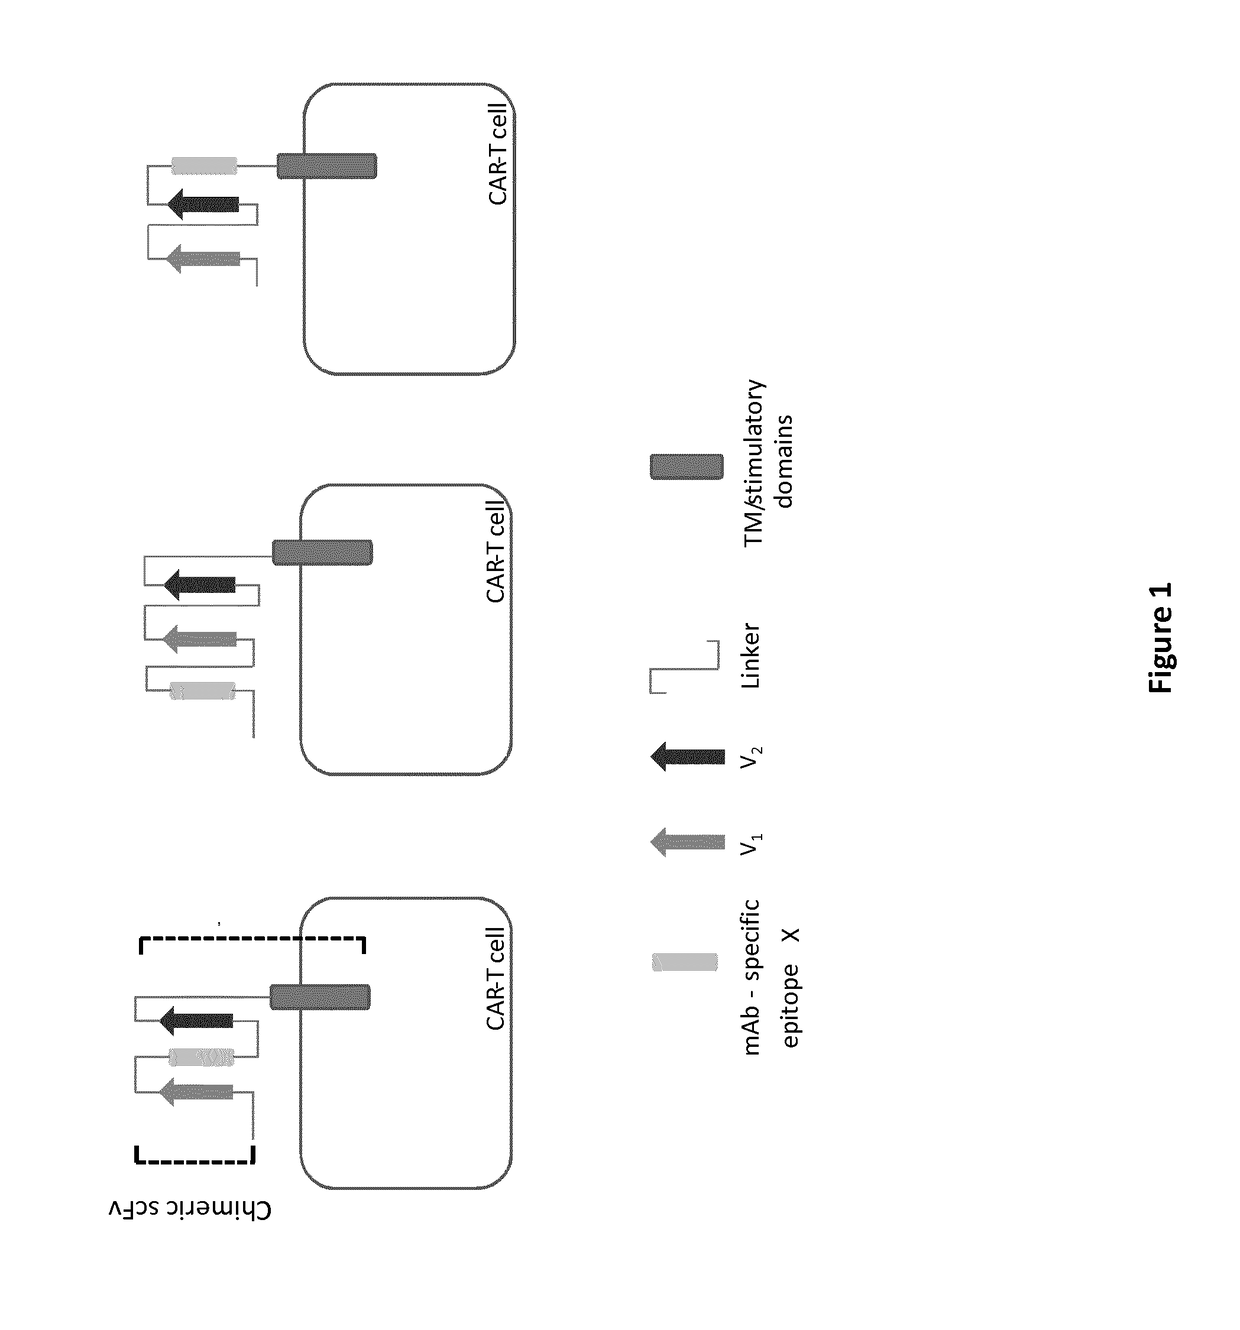 mAb-DRIVEN CHIMERIC ANTIGEN RECEPTOR SYSTEMS FOR SORTING/DEPLETING ENGINEERED IMMUNE CELLS